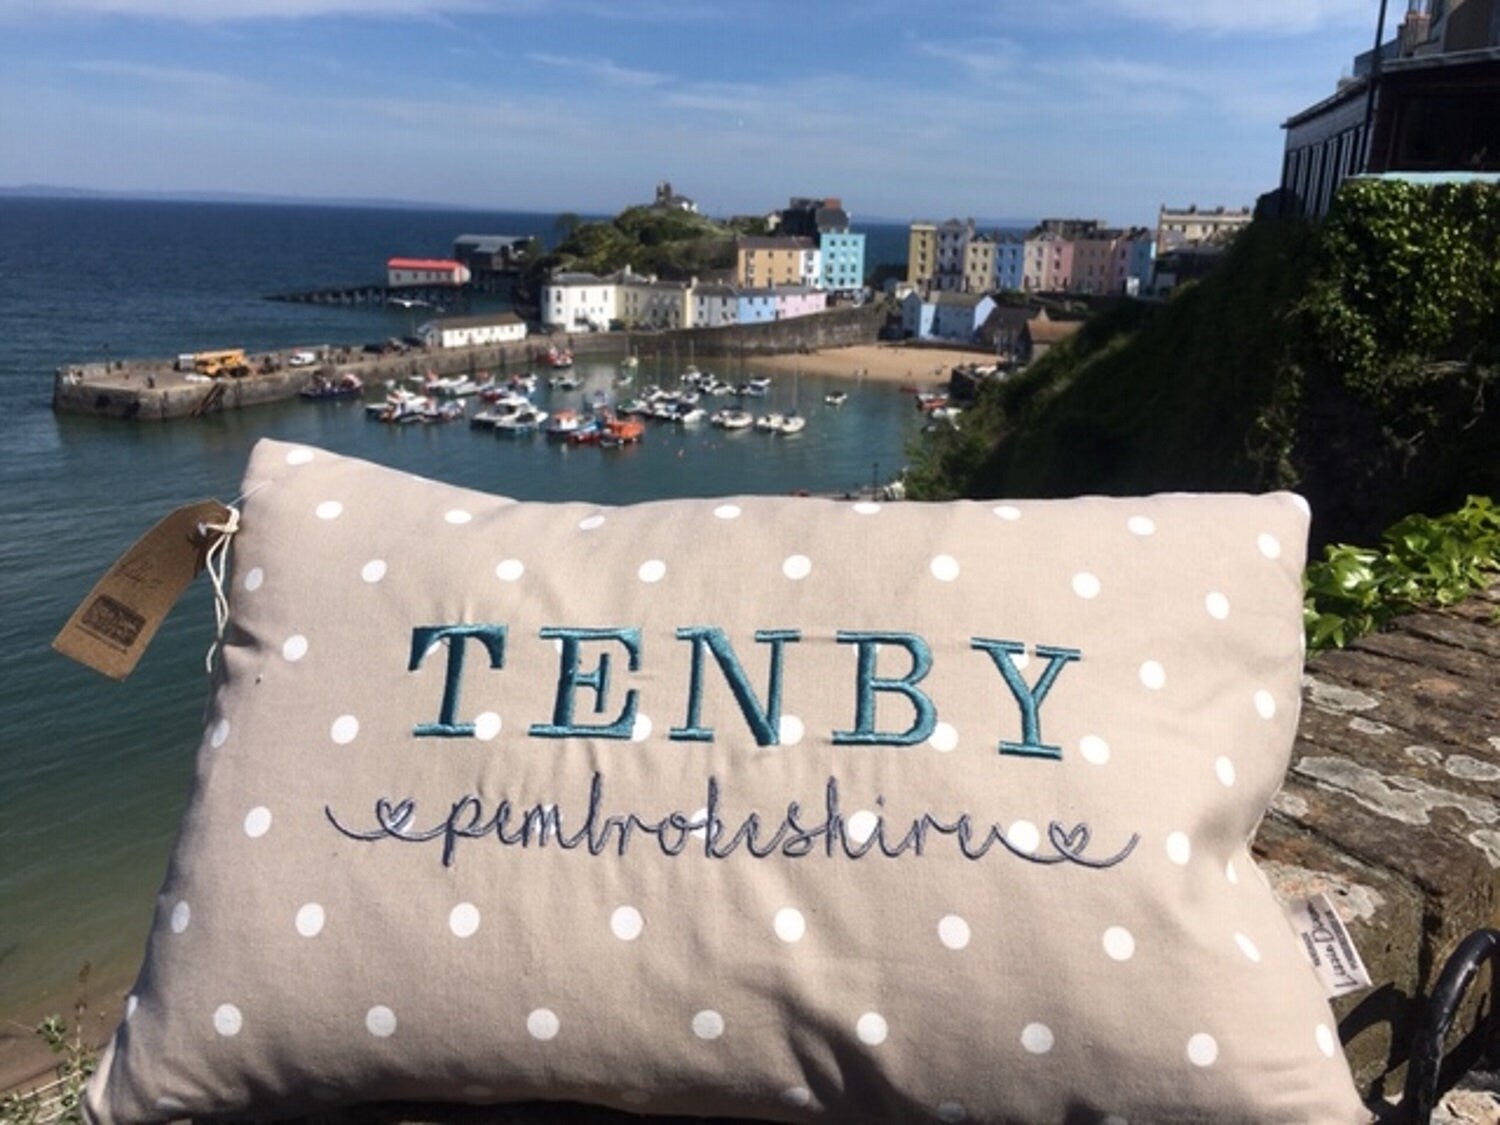 Tenby -Pembrokeshire- Location cushion 20" x 12" Cushion Cover Taupe Dotty and Sea Shell staycation -Nautical cover embroidered